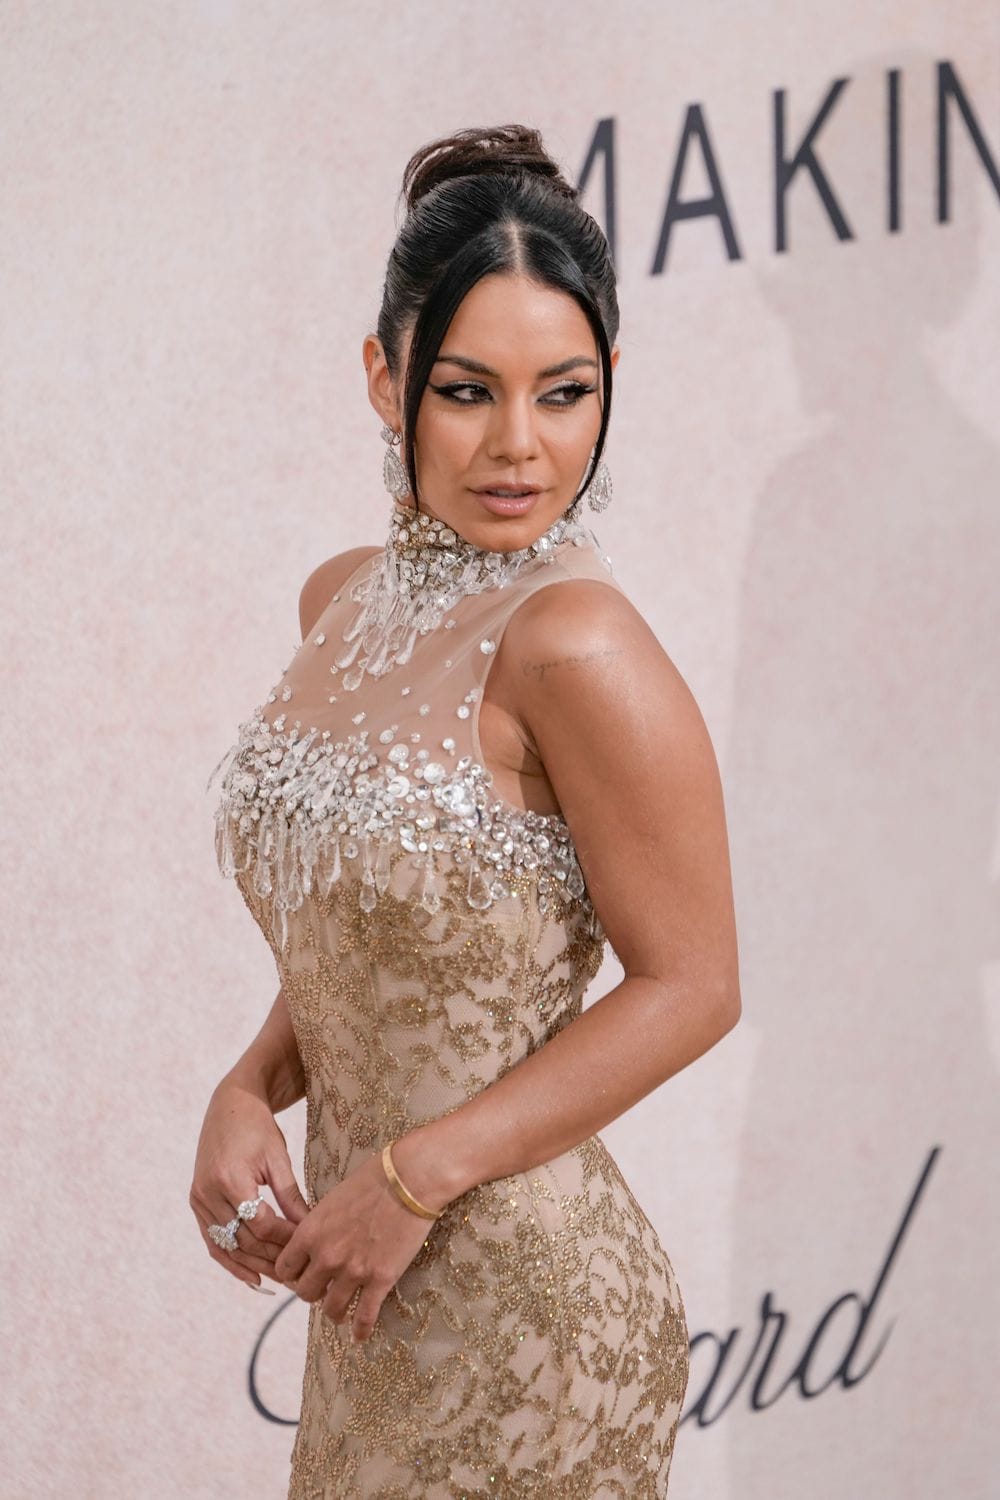 Vanessa Hudgens hit the red carpet in Bohemian style at the 28th amfAR Gala during the 2022 Cannes Film Festival at the Hotel du Cap-Eden-Roc on Thursday (May 26) in Cap d’Antibes, France.